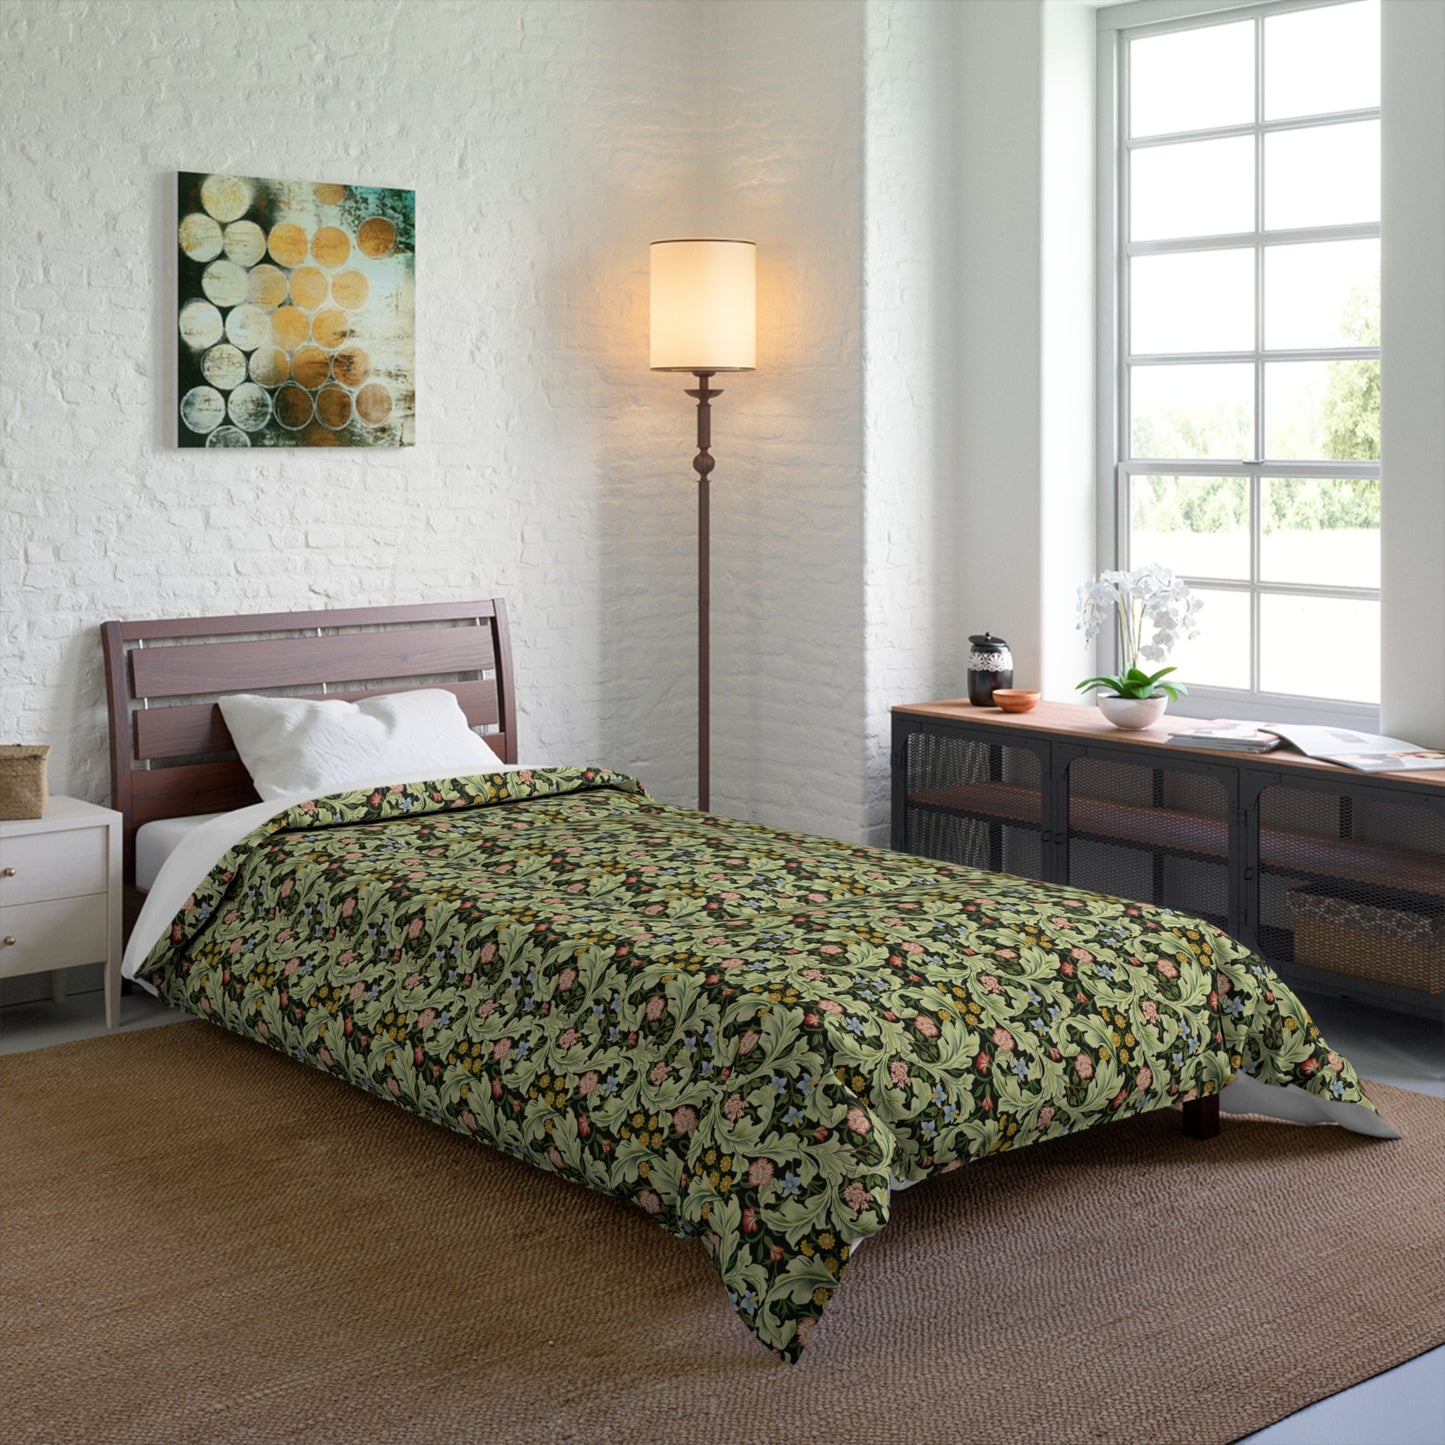 william-morris-co-comforter-leicester-collection-green-4